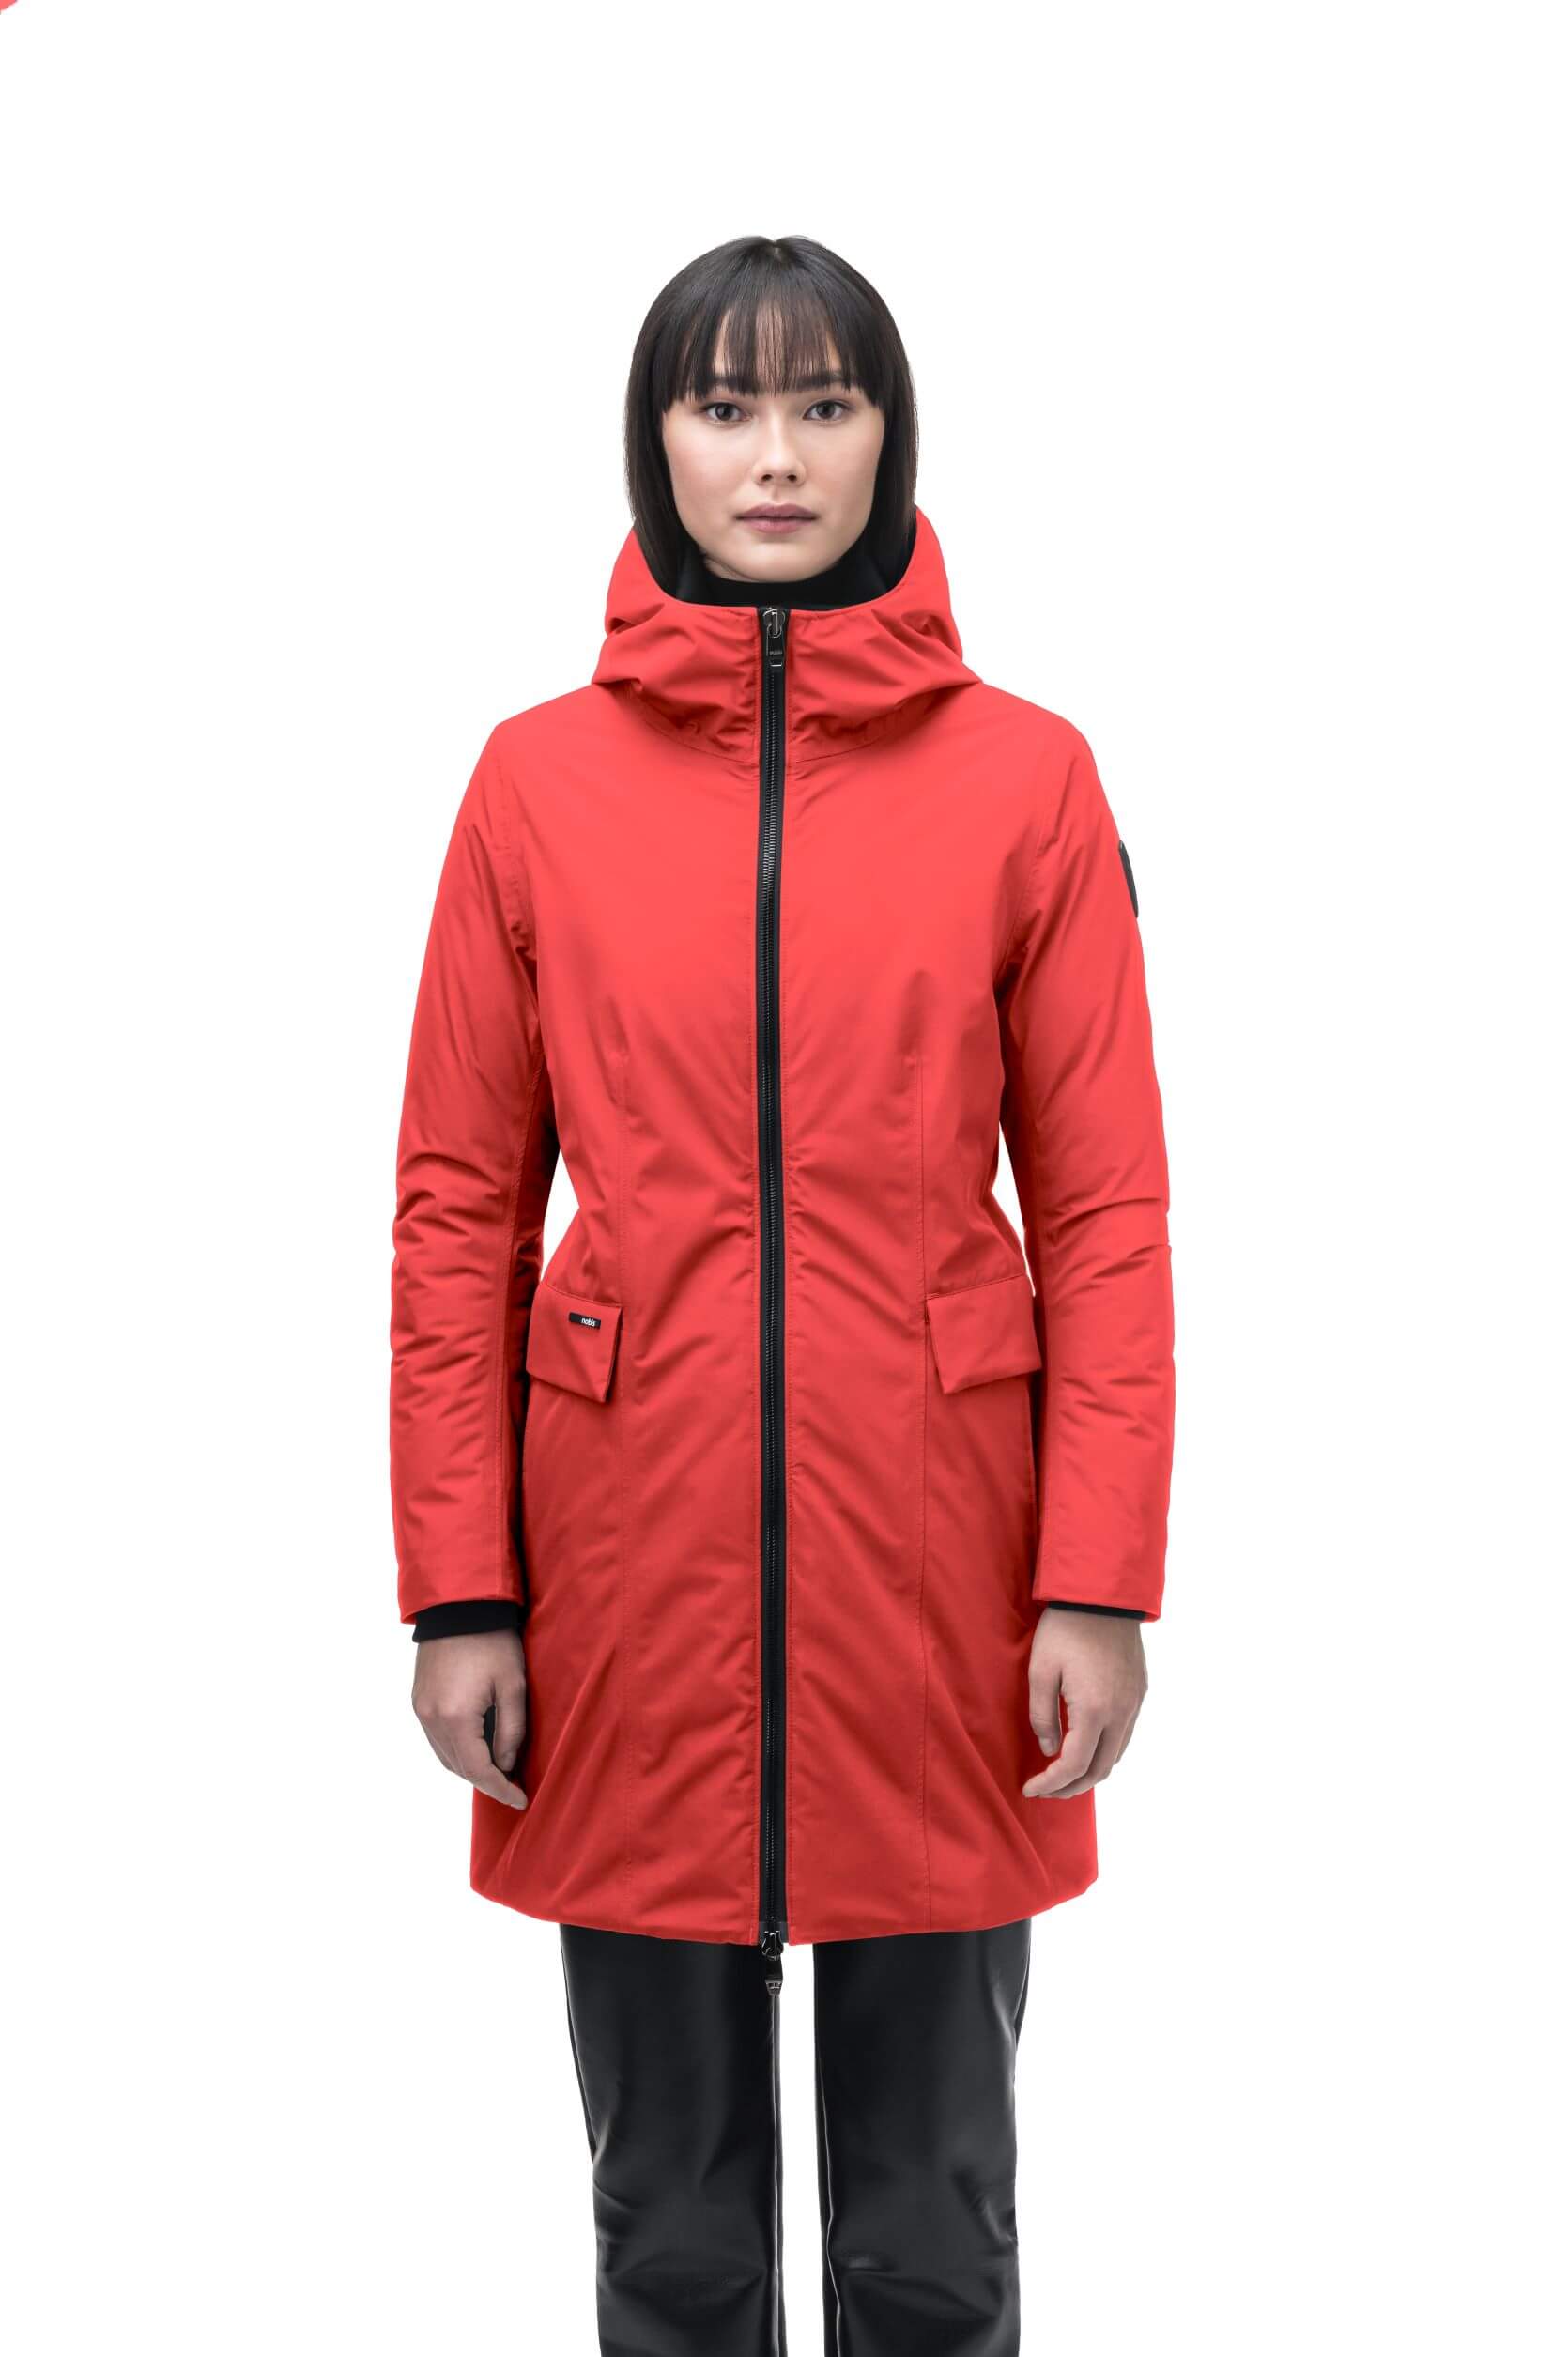 Romeda Ladies Mid Thigh Parka in thigh length, Canadian duck down insulation, non-removable hood with removable fur ruff trim, and two-way front zipper, in Vermillion